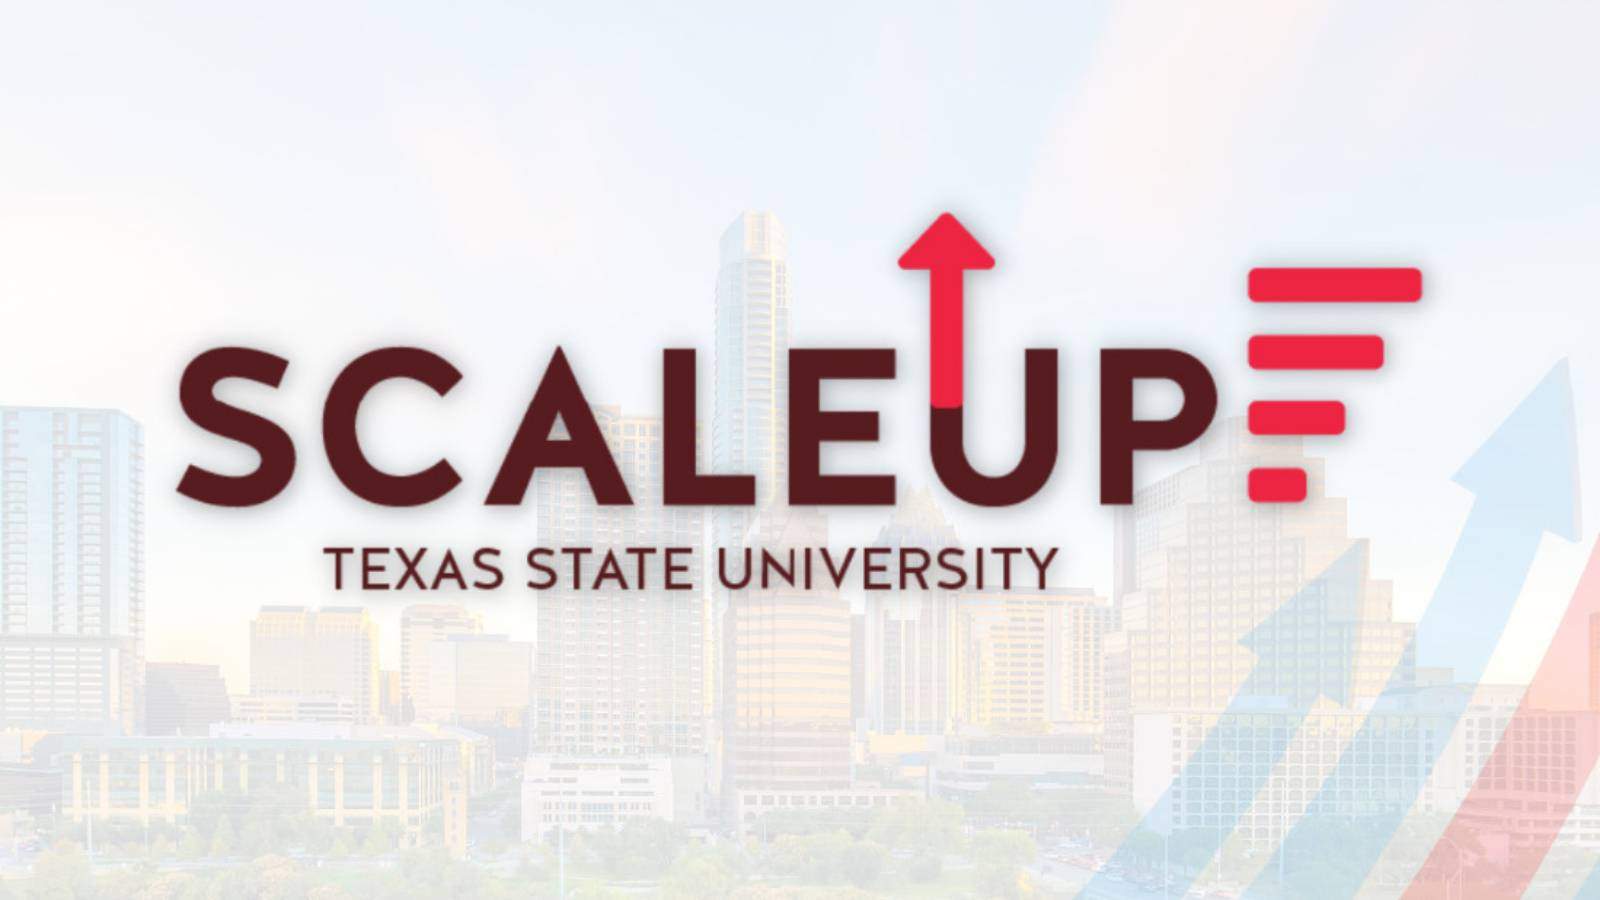 cityscape with text: SCALEUP TEXAS STATE UNIVERSITY